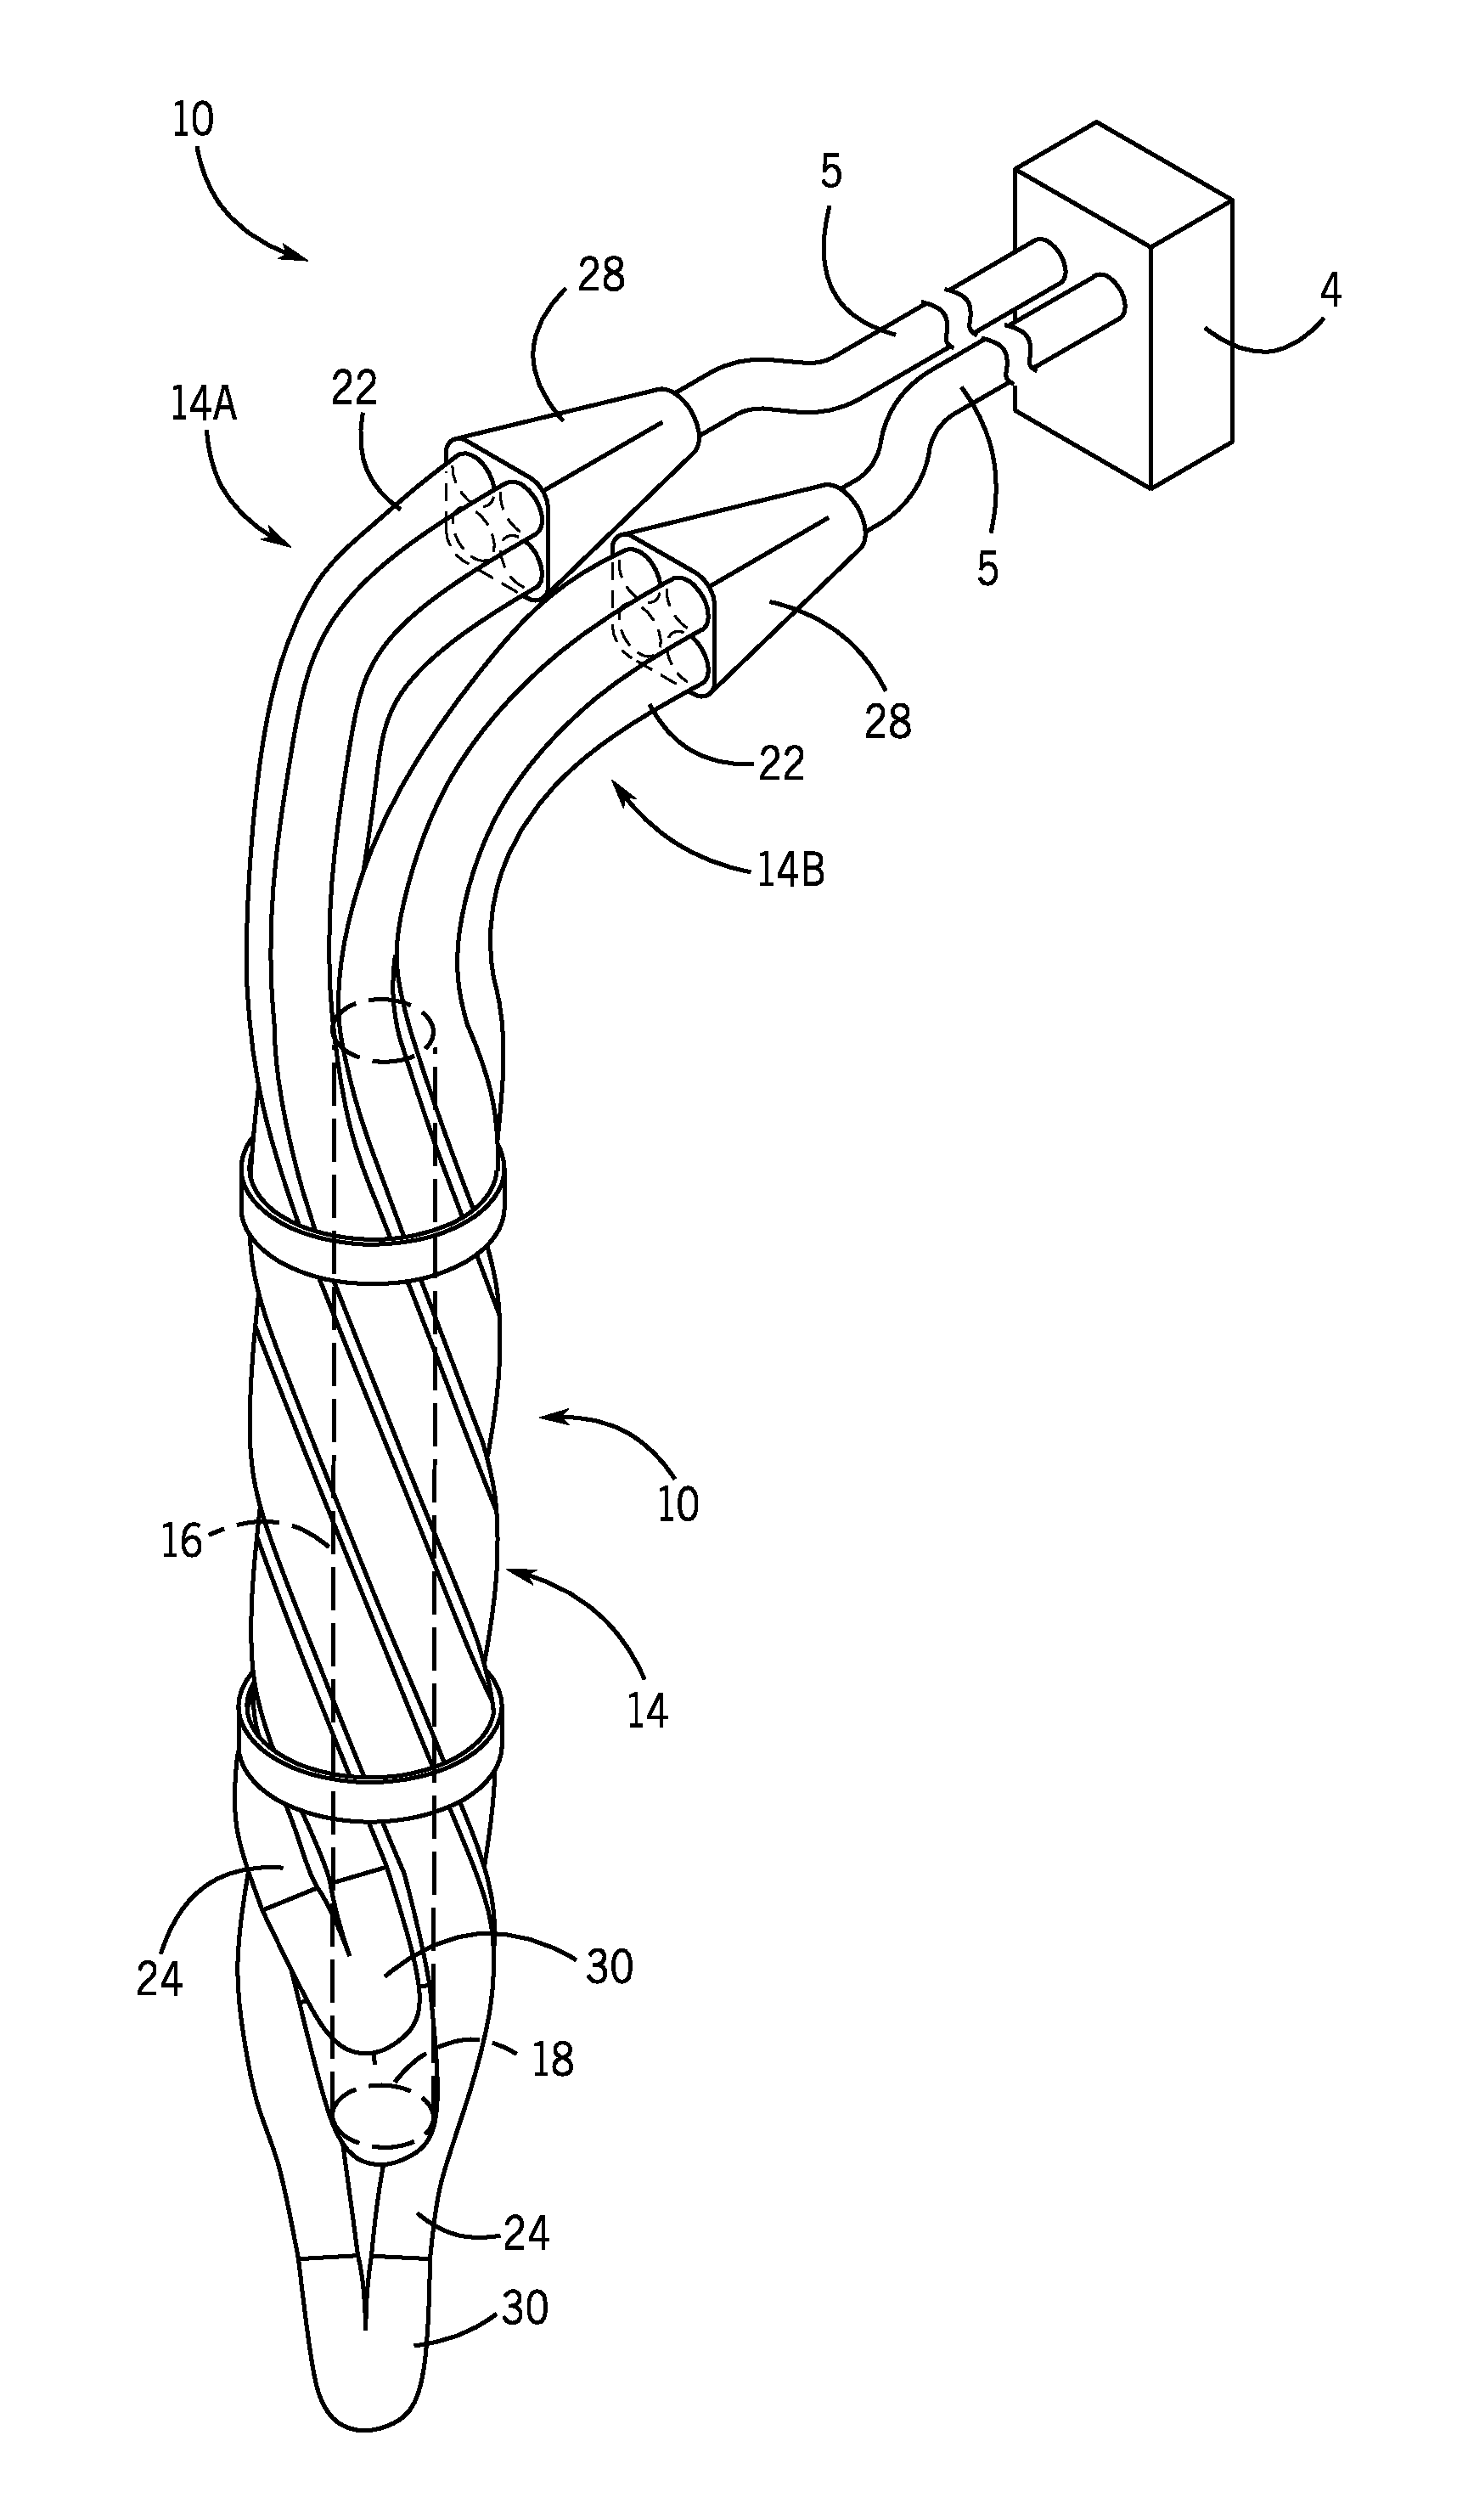 Twisted conduit for geothermal heat exchange